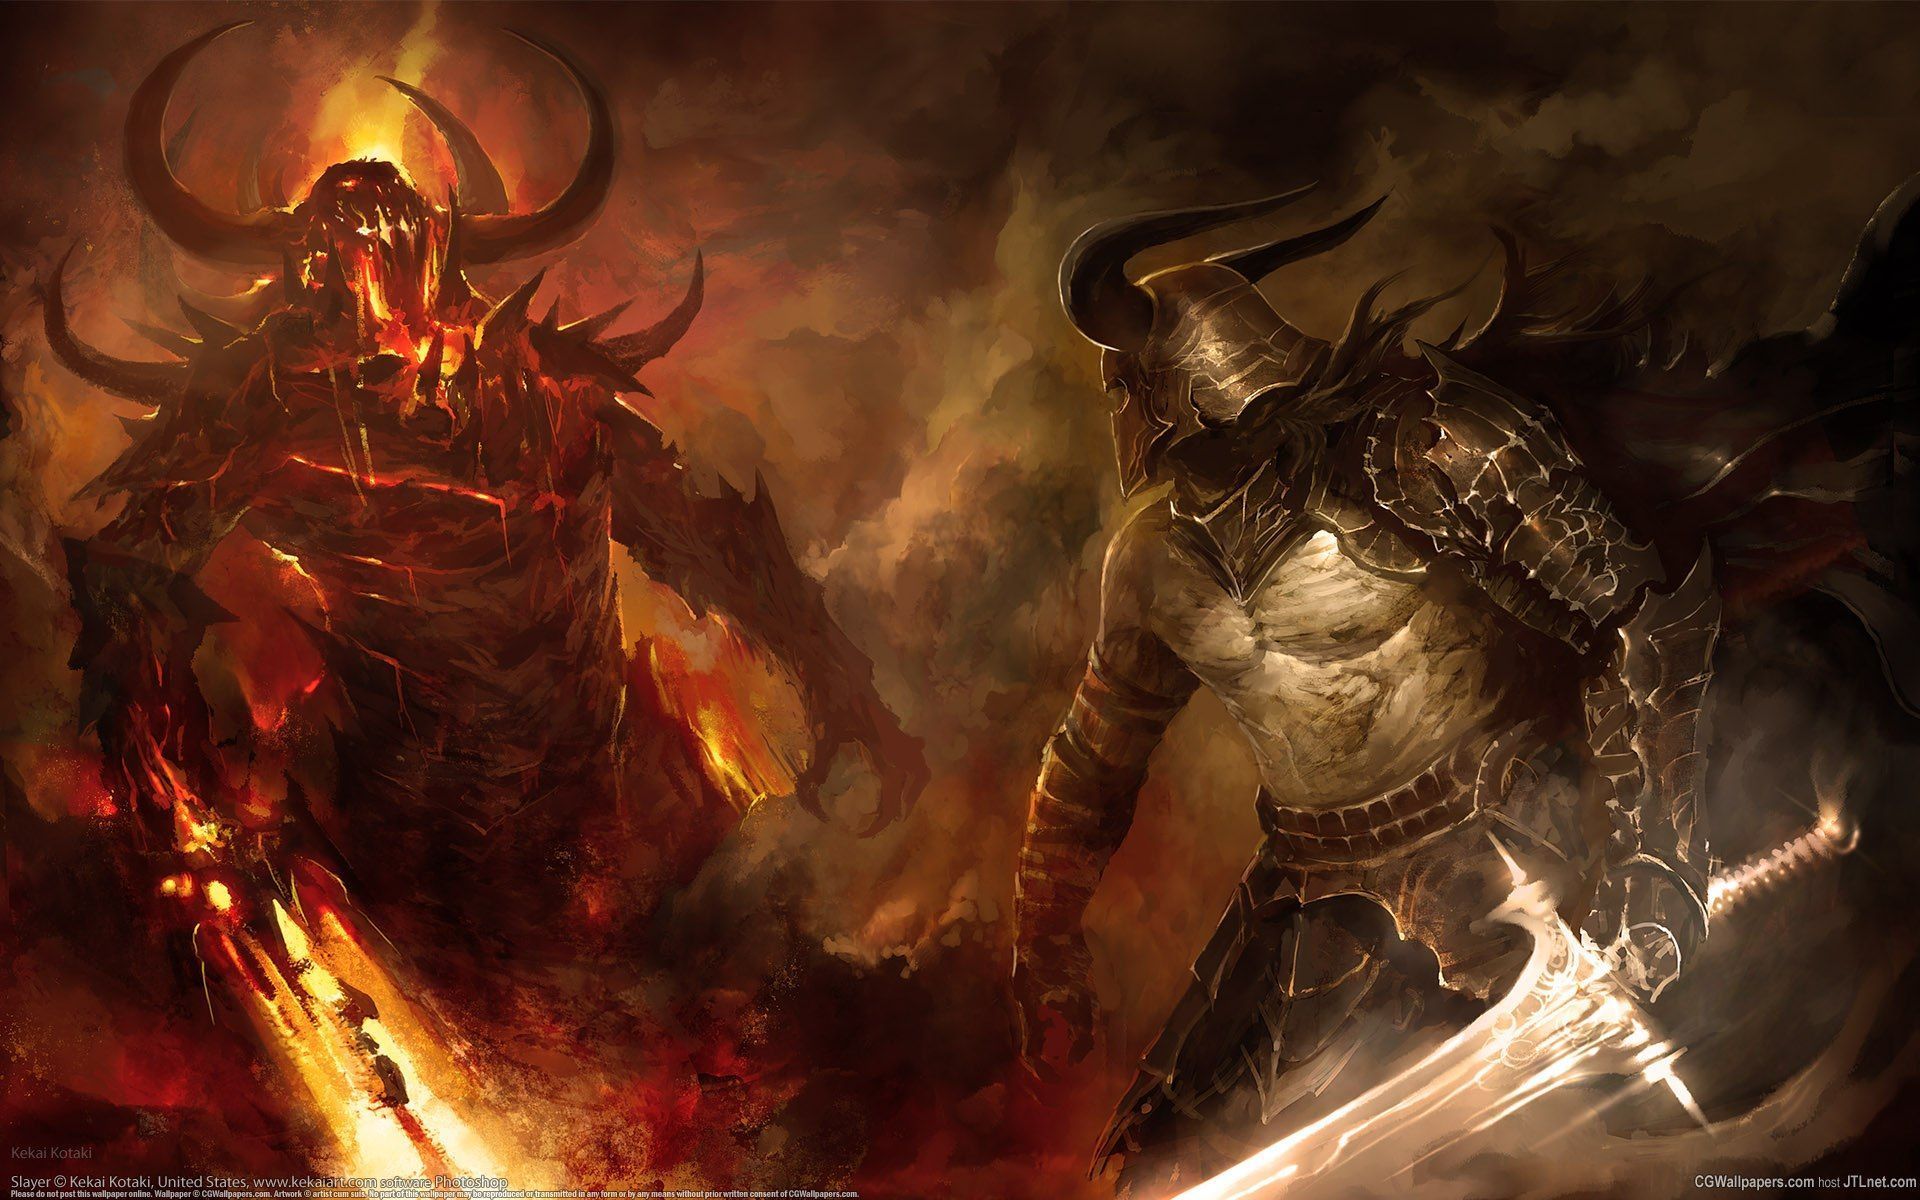 Demon vs knight wallpaper 1920x1200 - (#29227) - High Quality and ...